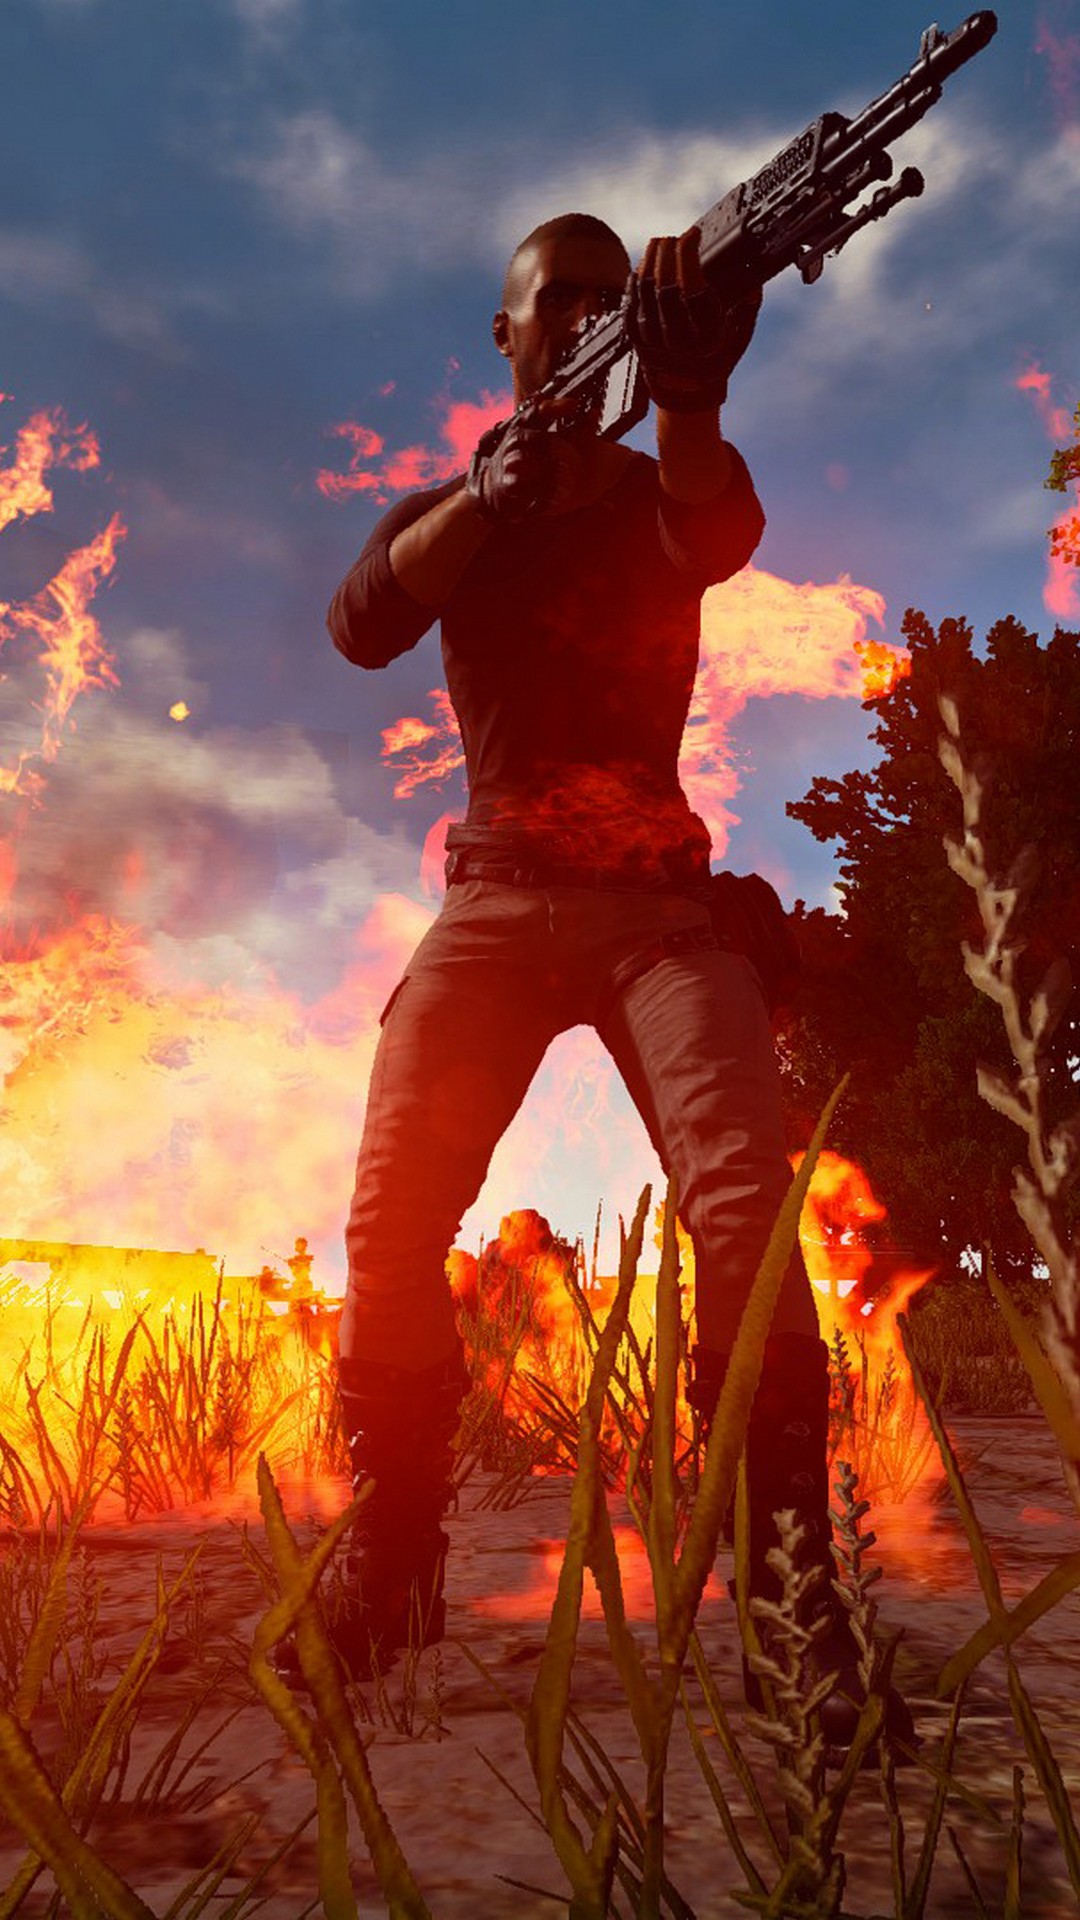 PUBG Mobile Wallpaper iPhone HD with image resolution 1080x1920 pixel. You can use this wallpaper as background for your desktop Computer Screensavers, Android or iPhone smartphones